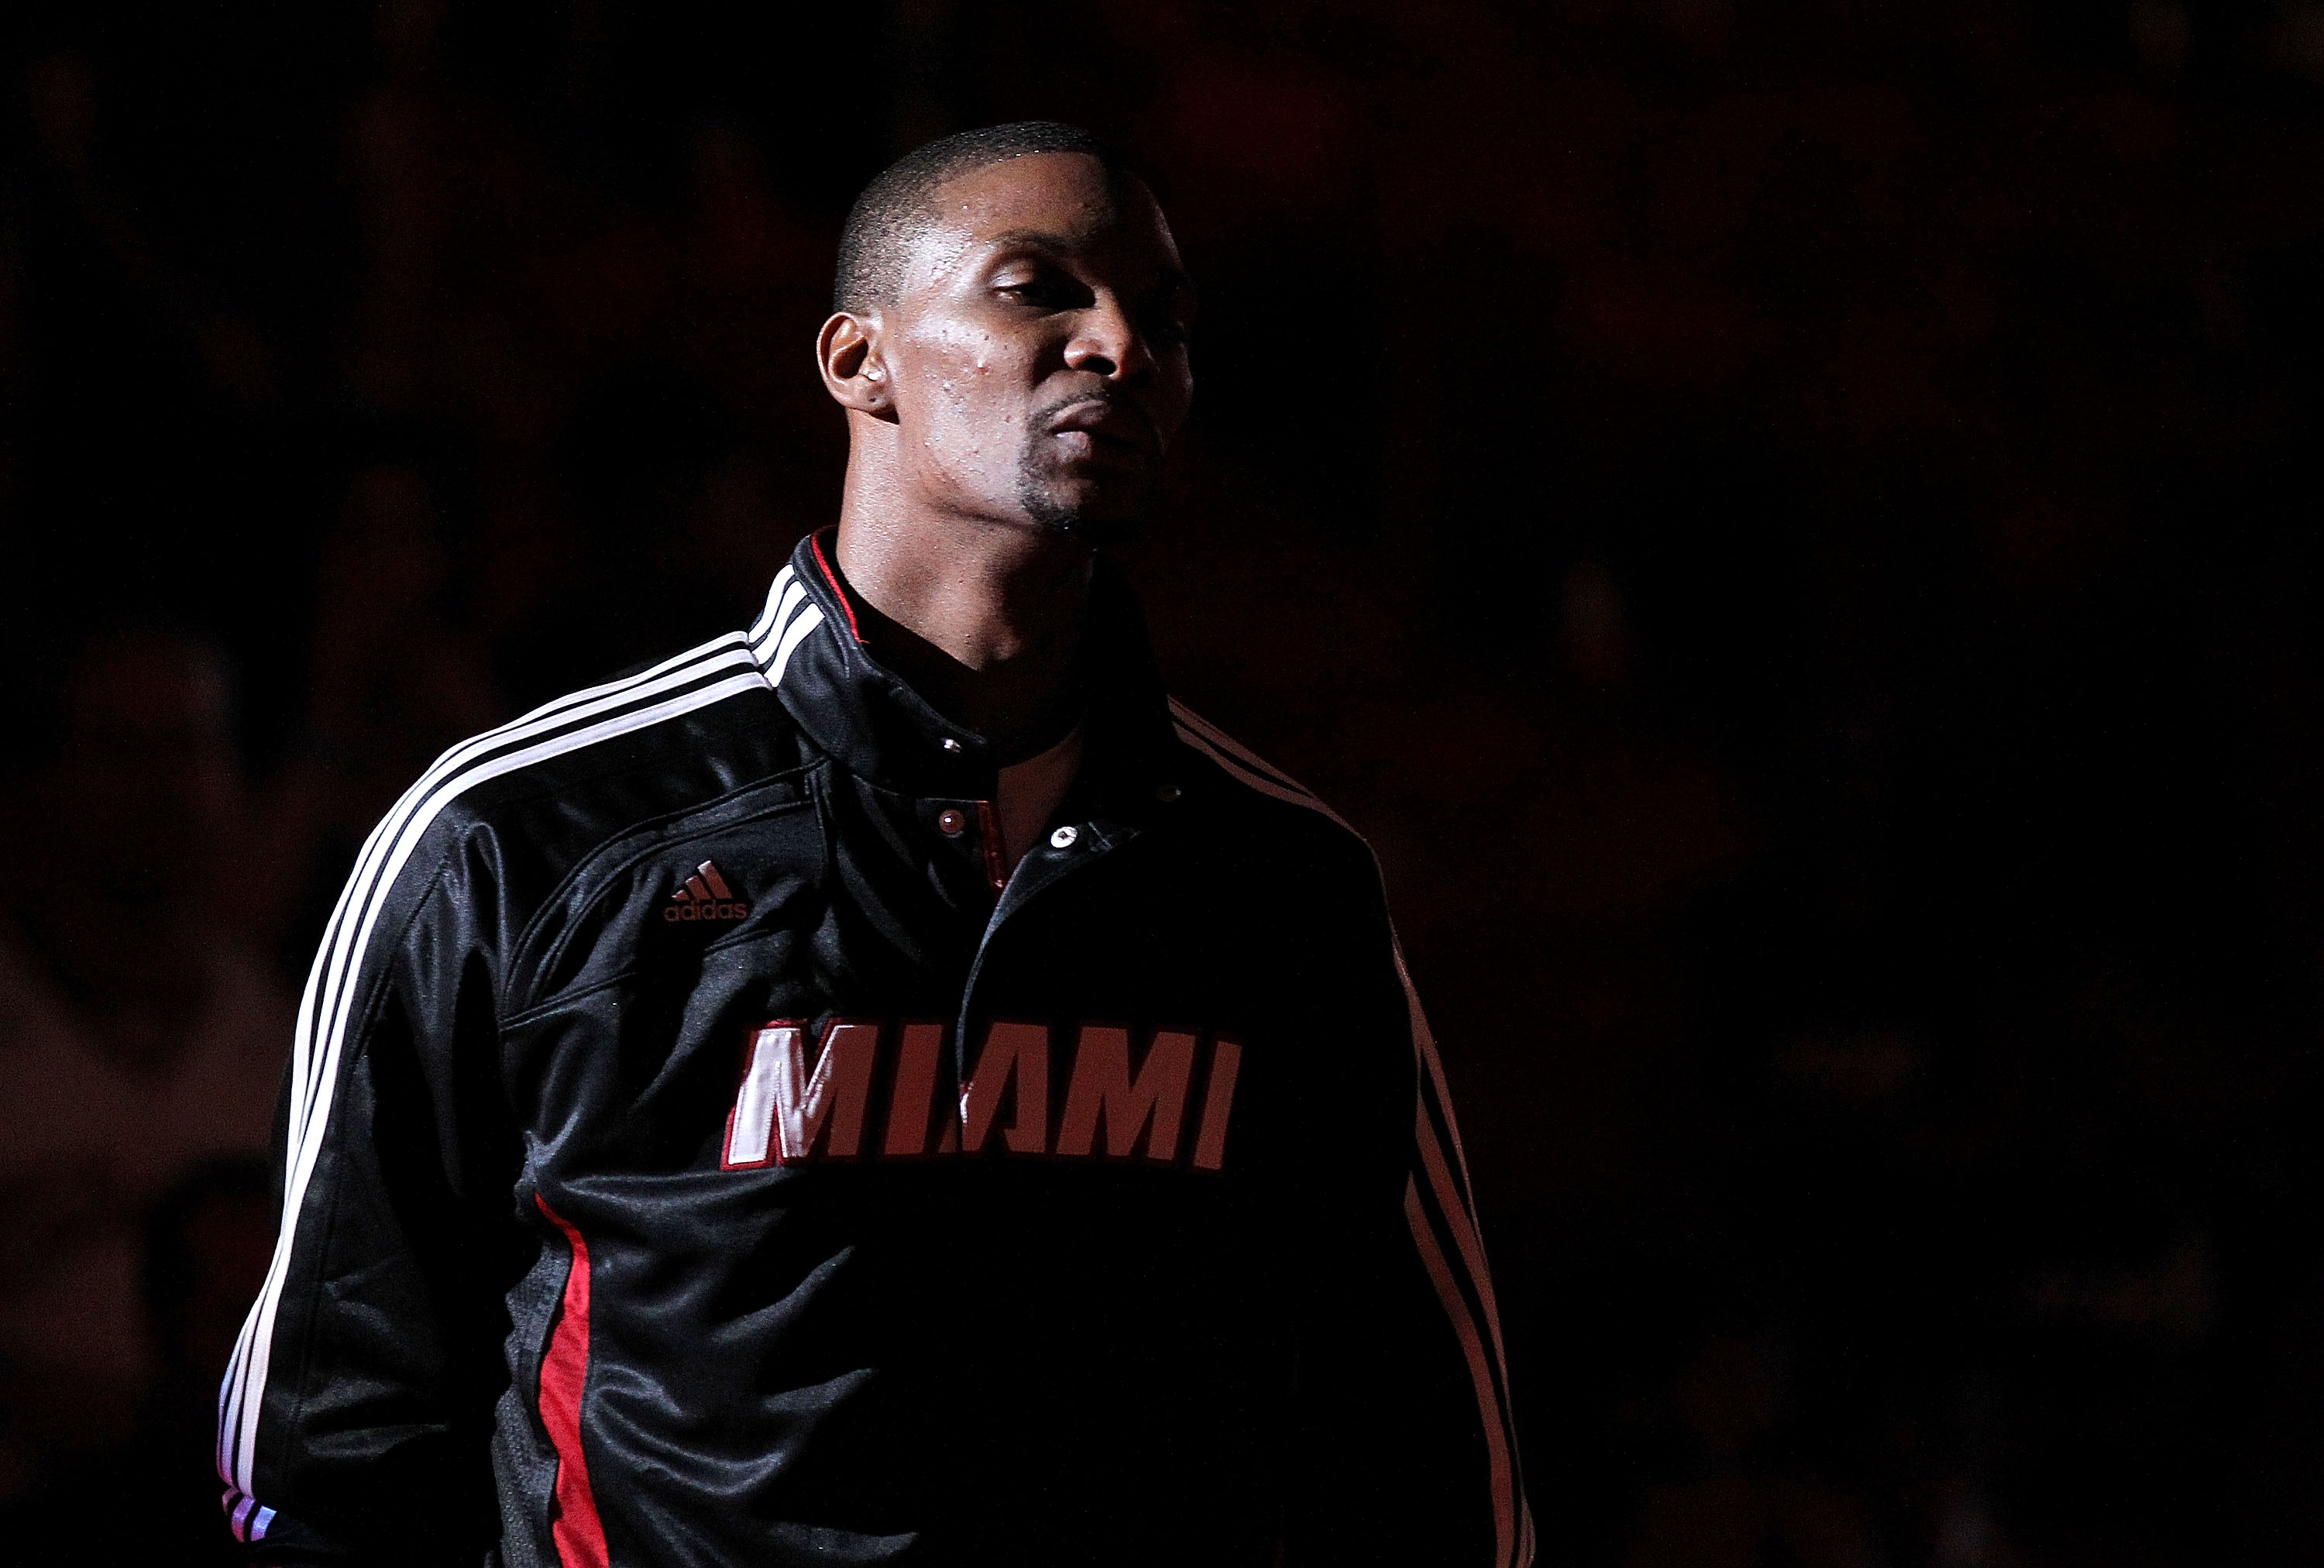 MIAMI, FL - DECEMBER 04:  Chris Bosh #1 of the Miami Heat looks on  during pregame against the Atlanta Hawks at American Airlines Arena on December 4, 2010 in Miami, Florida. NOTE TO USER: User expressly acknowledges and agrees that, by downloading and/or